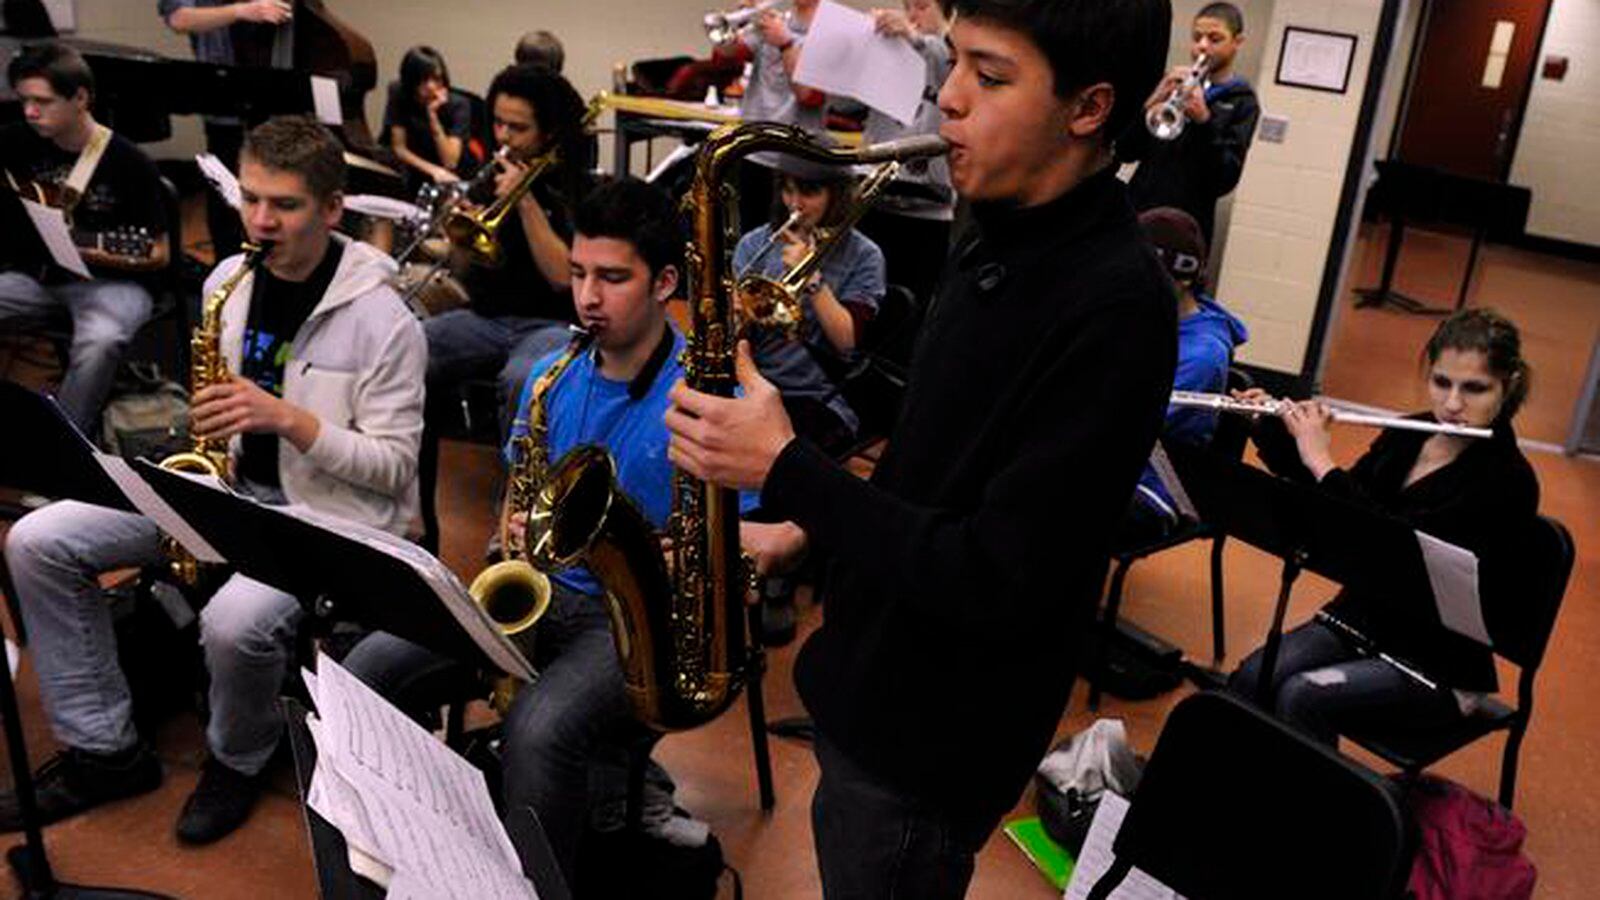 The saxophone section is front and center at a 2015 Denver School of the Arts Jazz Workshop Orchestra rehearsal (Photo By Kathryn Scott Osler/The Denver Post).